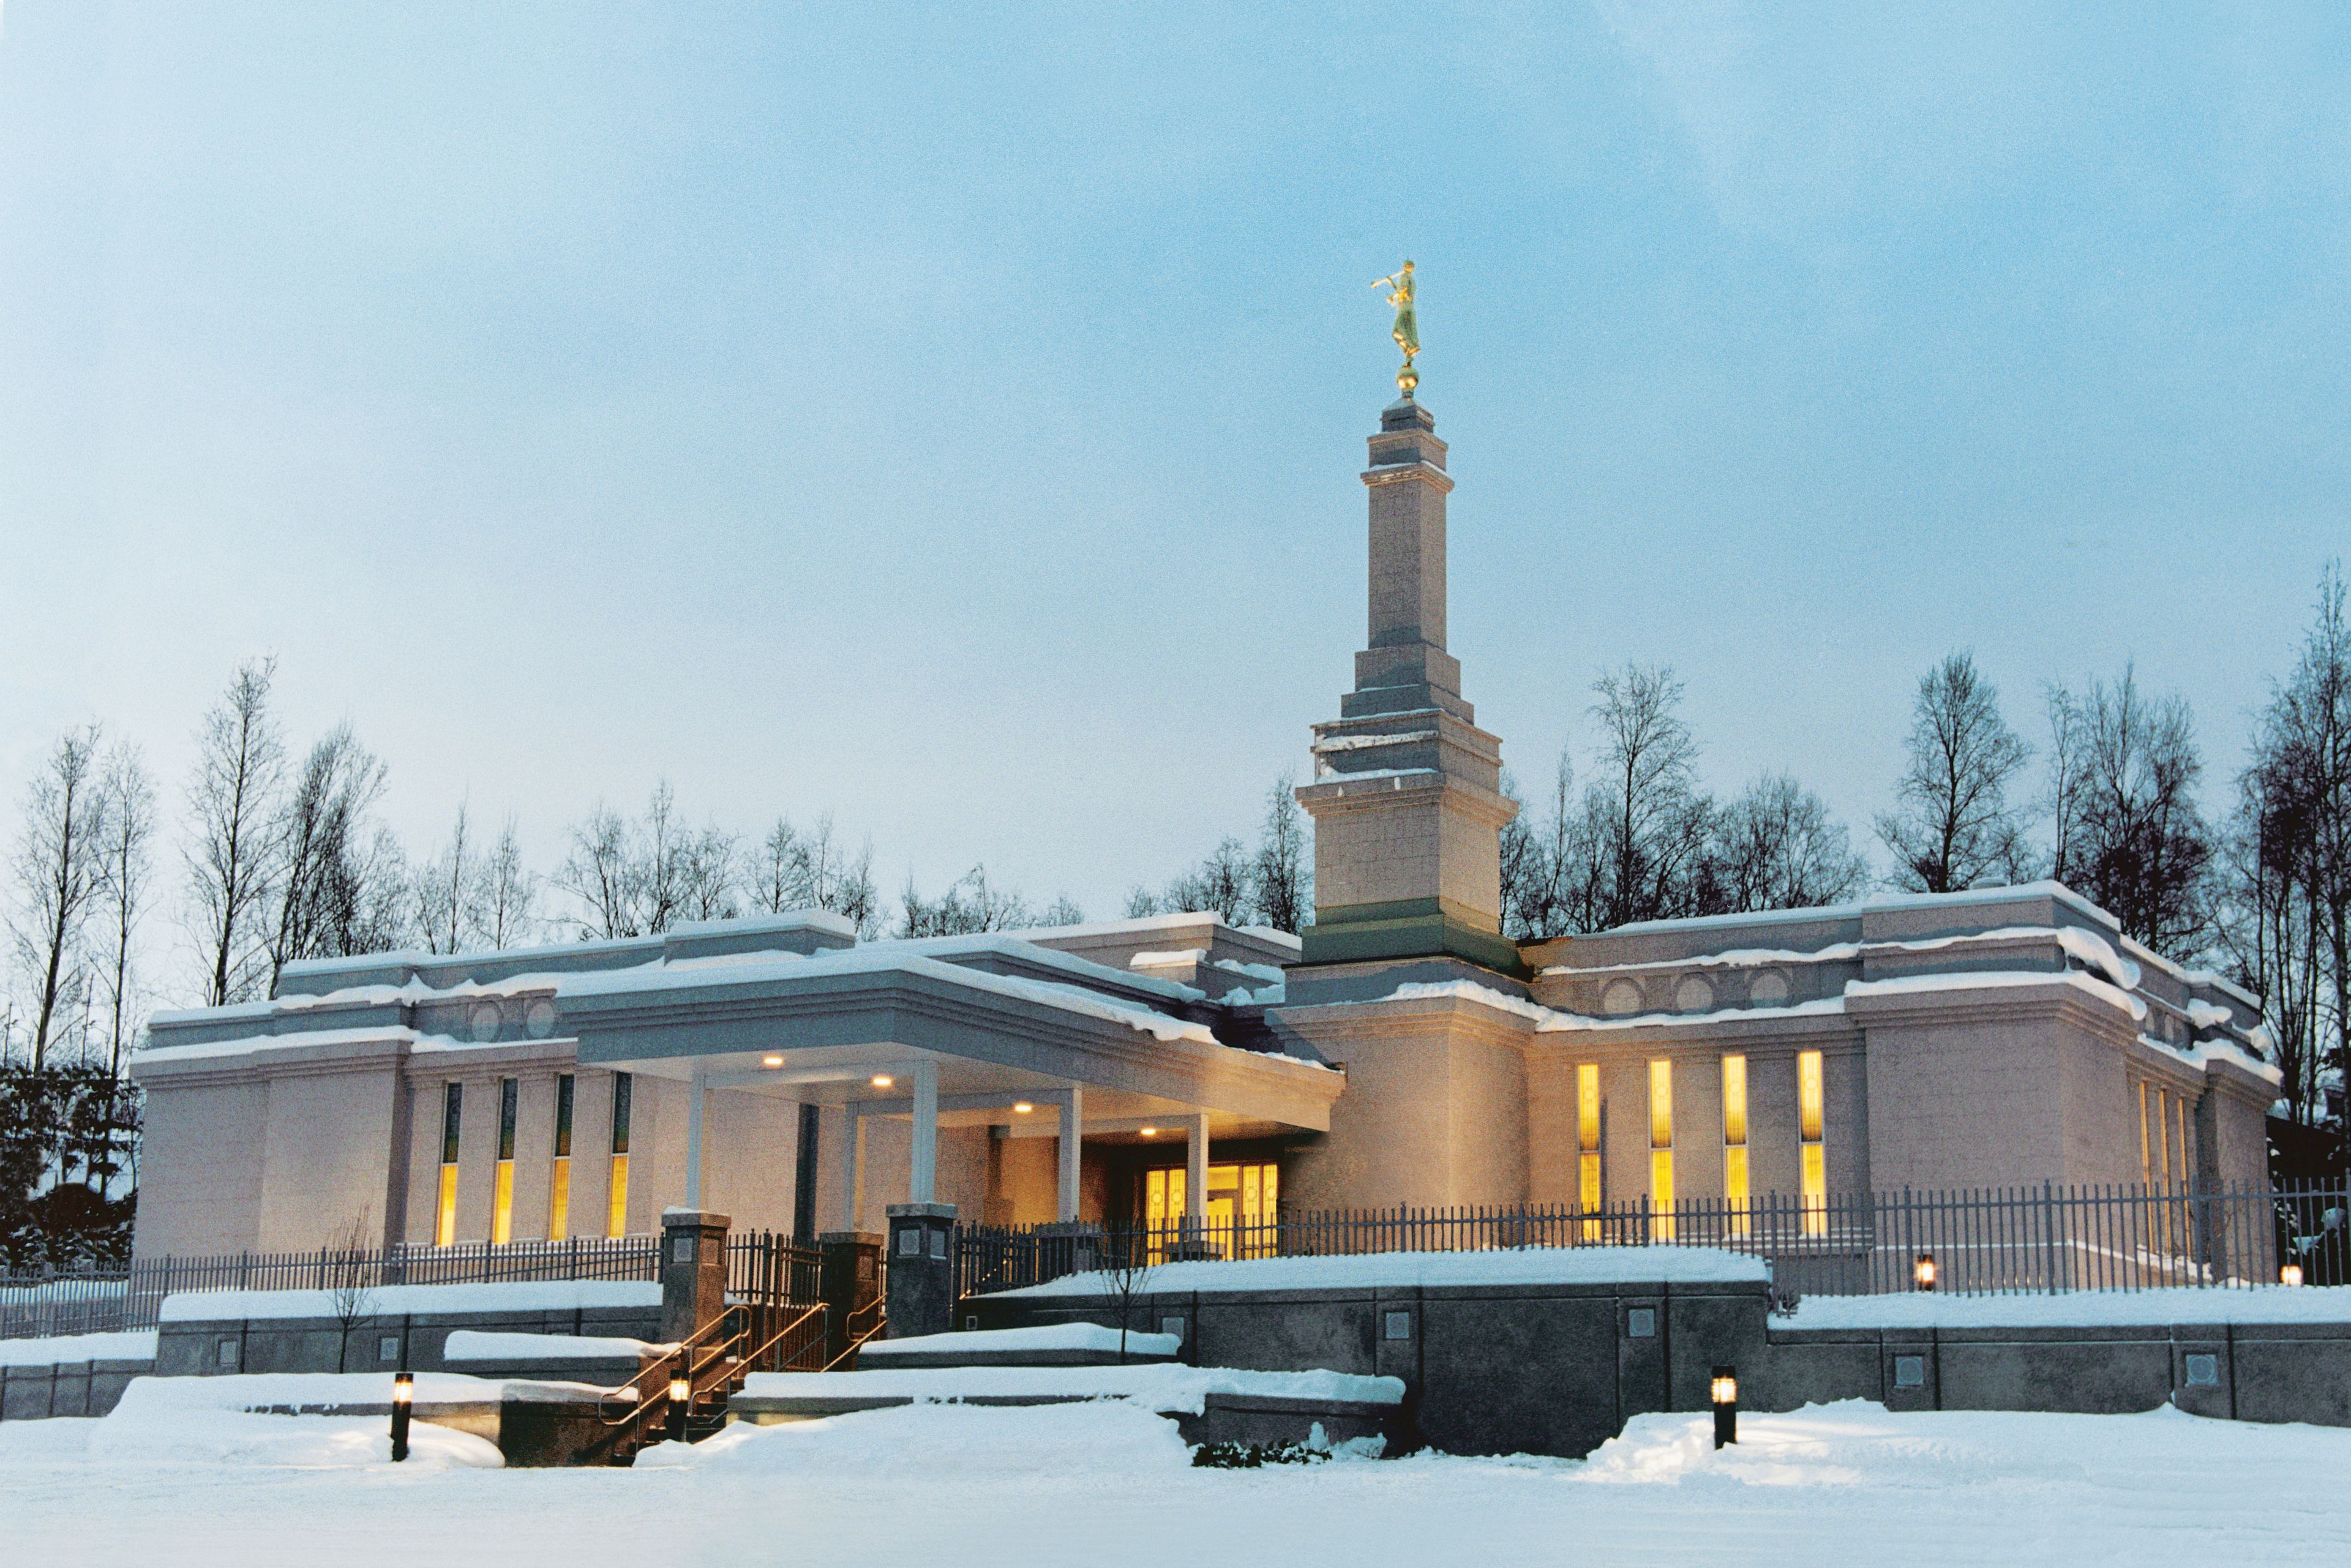 An exterior view of the entrance of the Anchorage Alaska Temple in the evening.